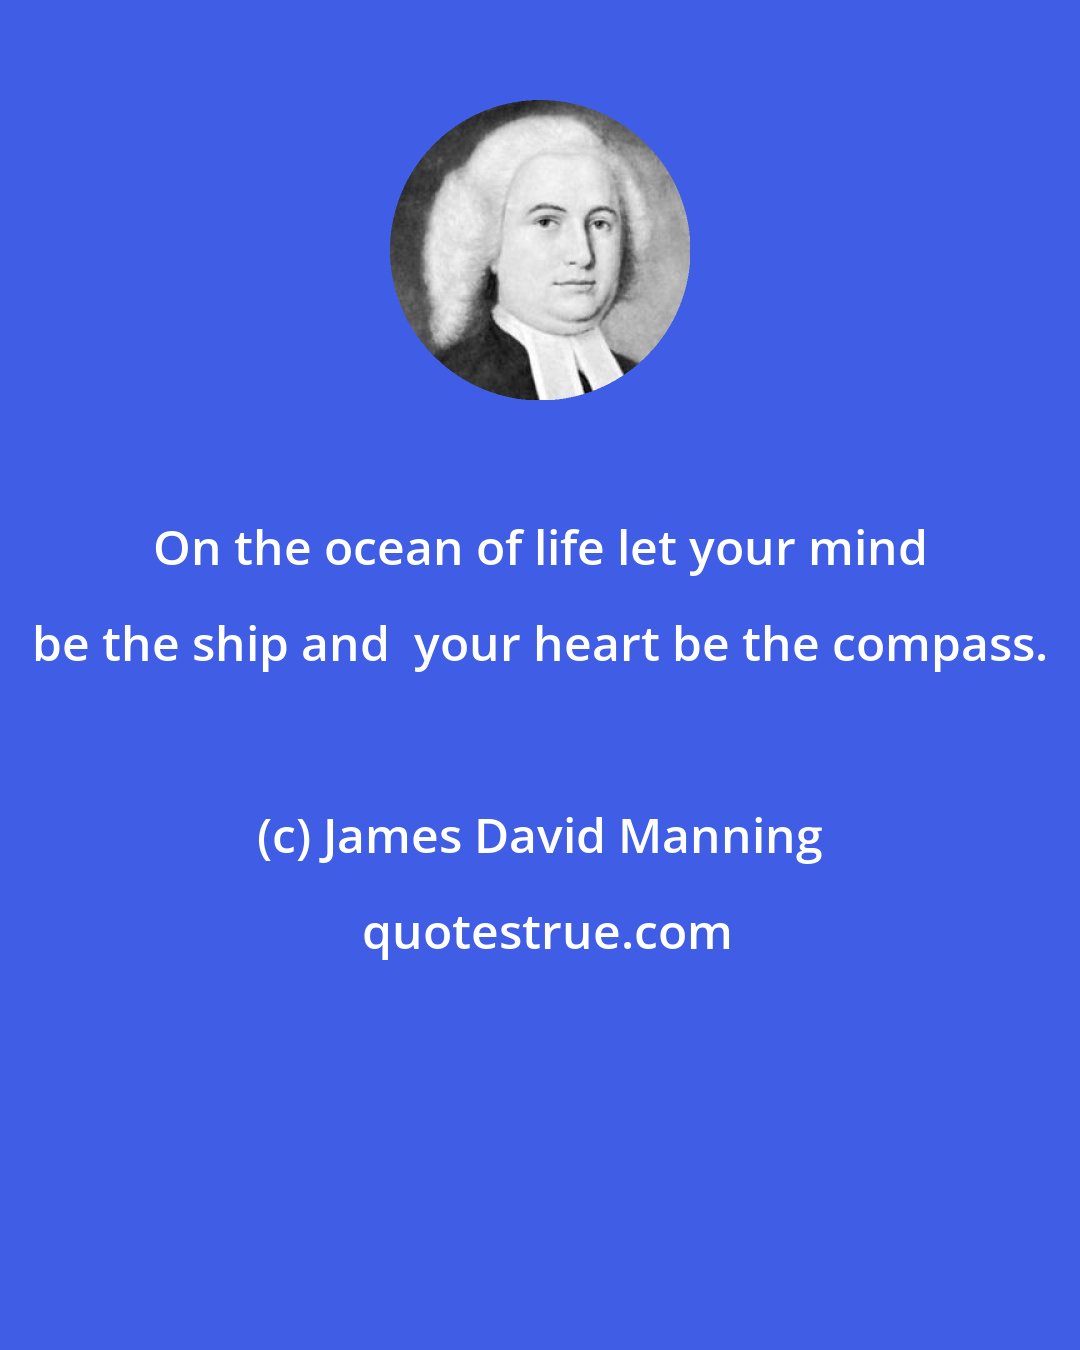 James David Manning: On the ocean of life let your mind be the ship and  your heart be the compass.